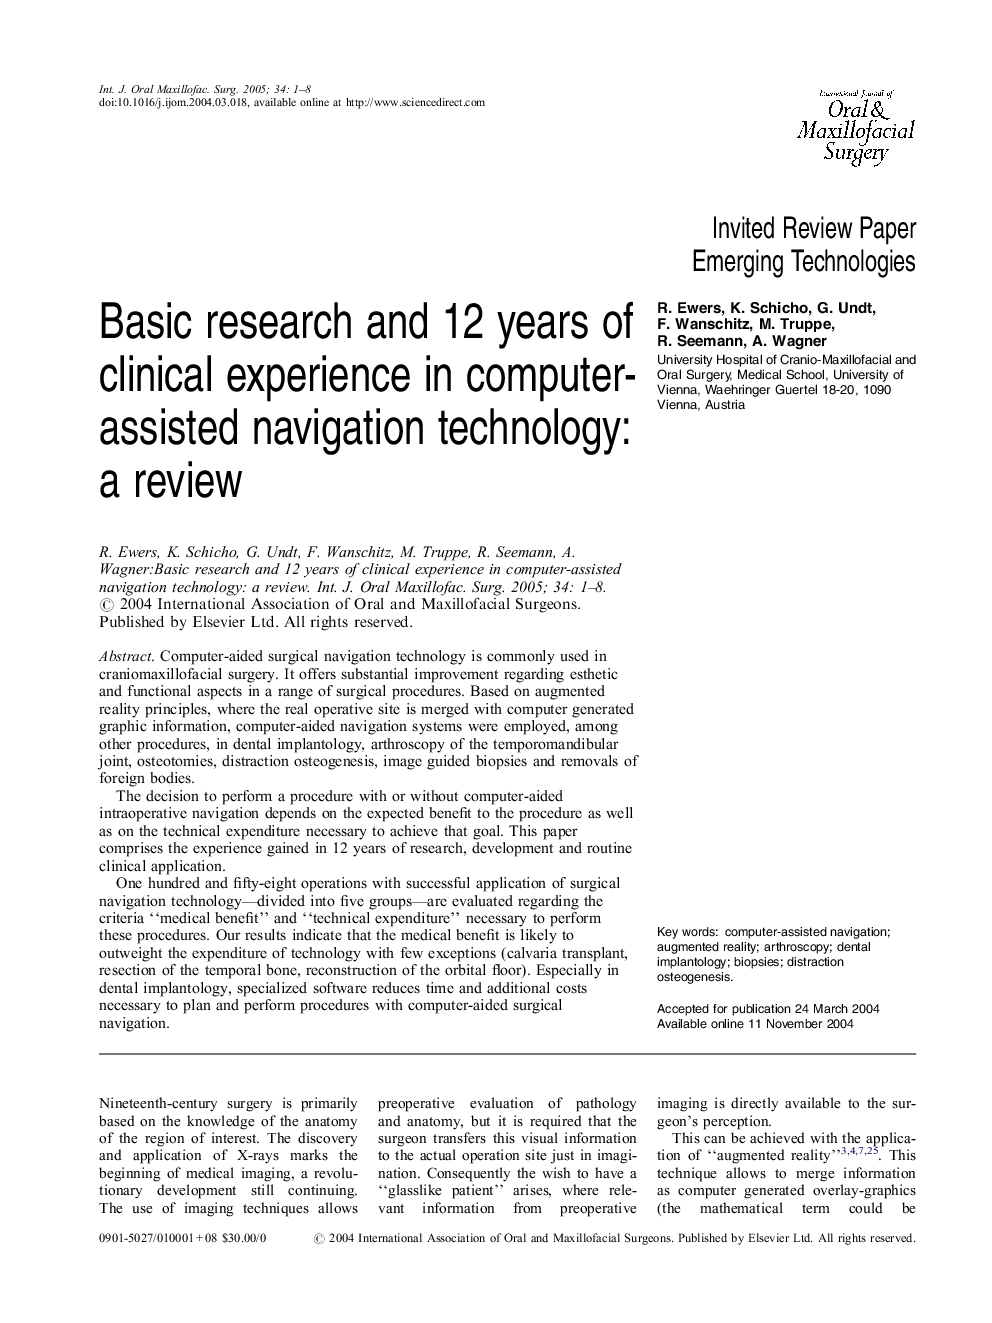 Basic research and 12 years of clinical experience in computer-assisted navigation technology: a review